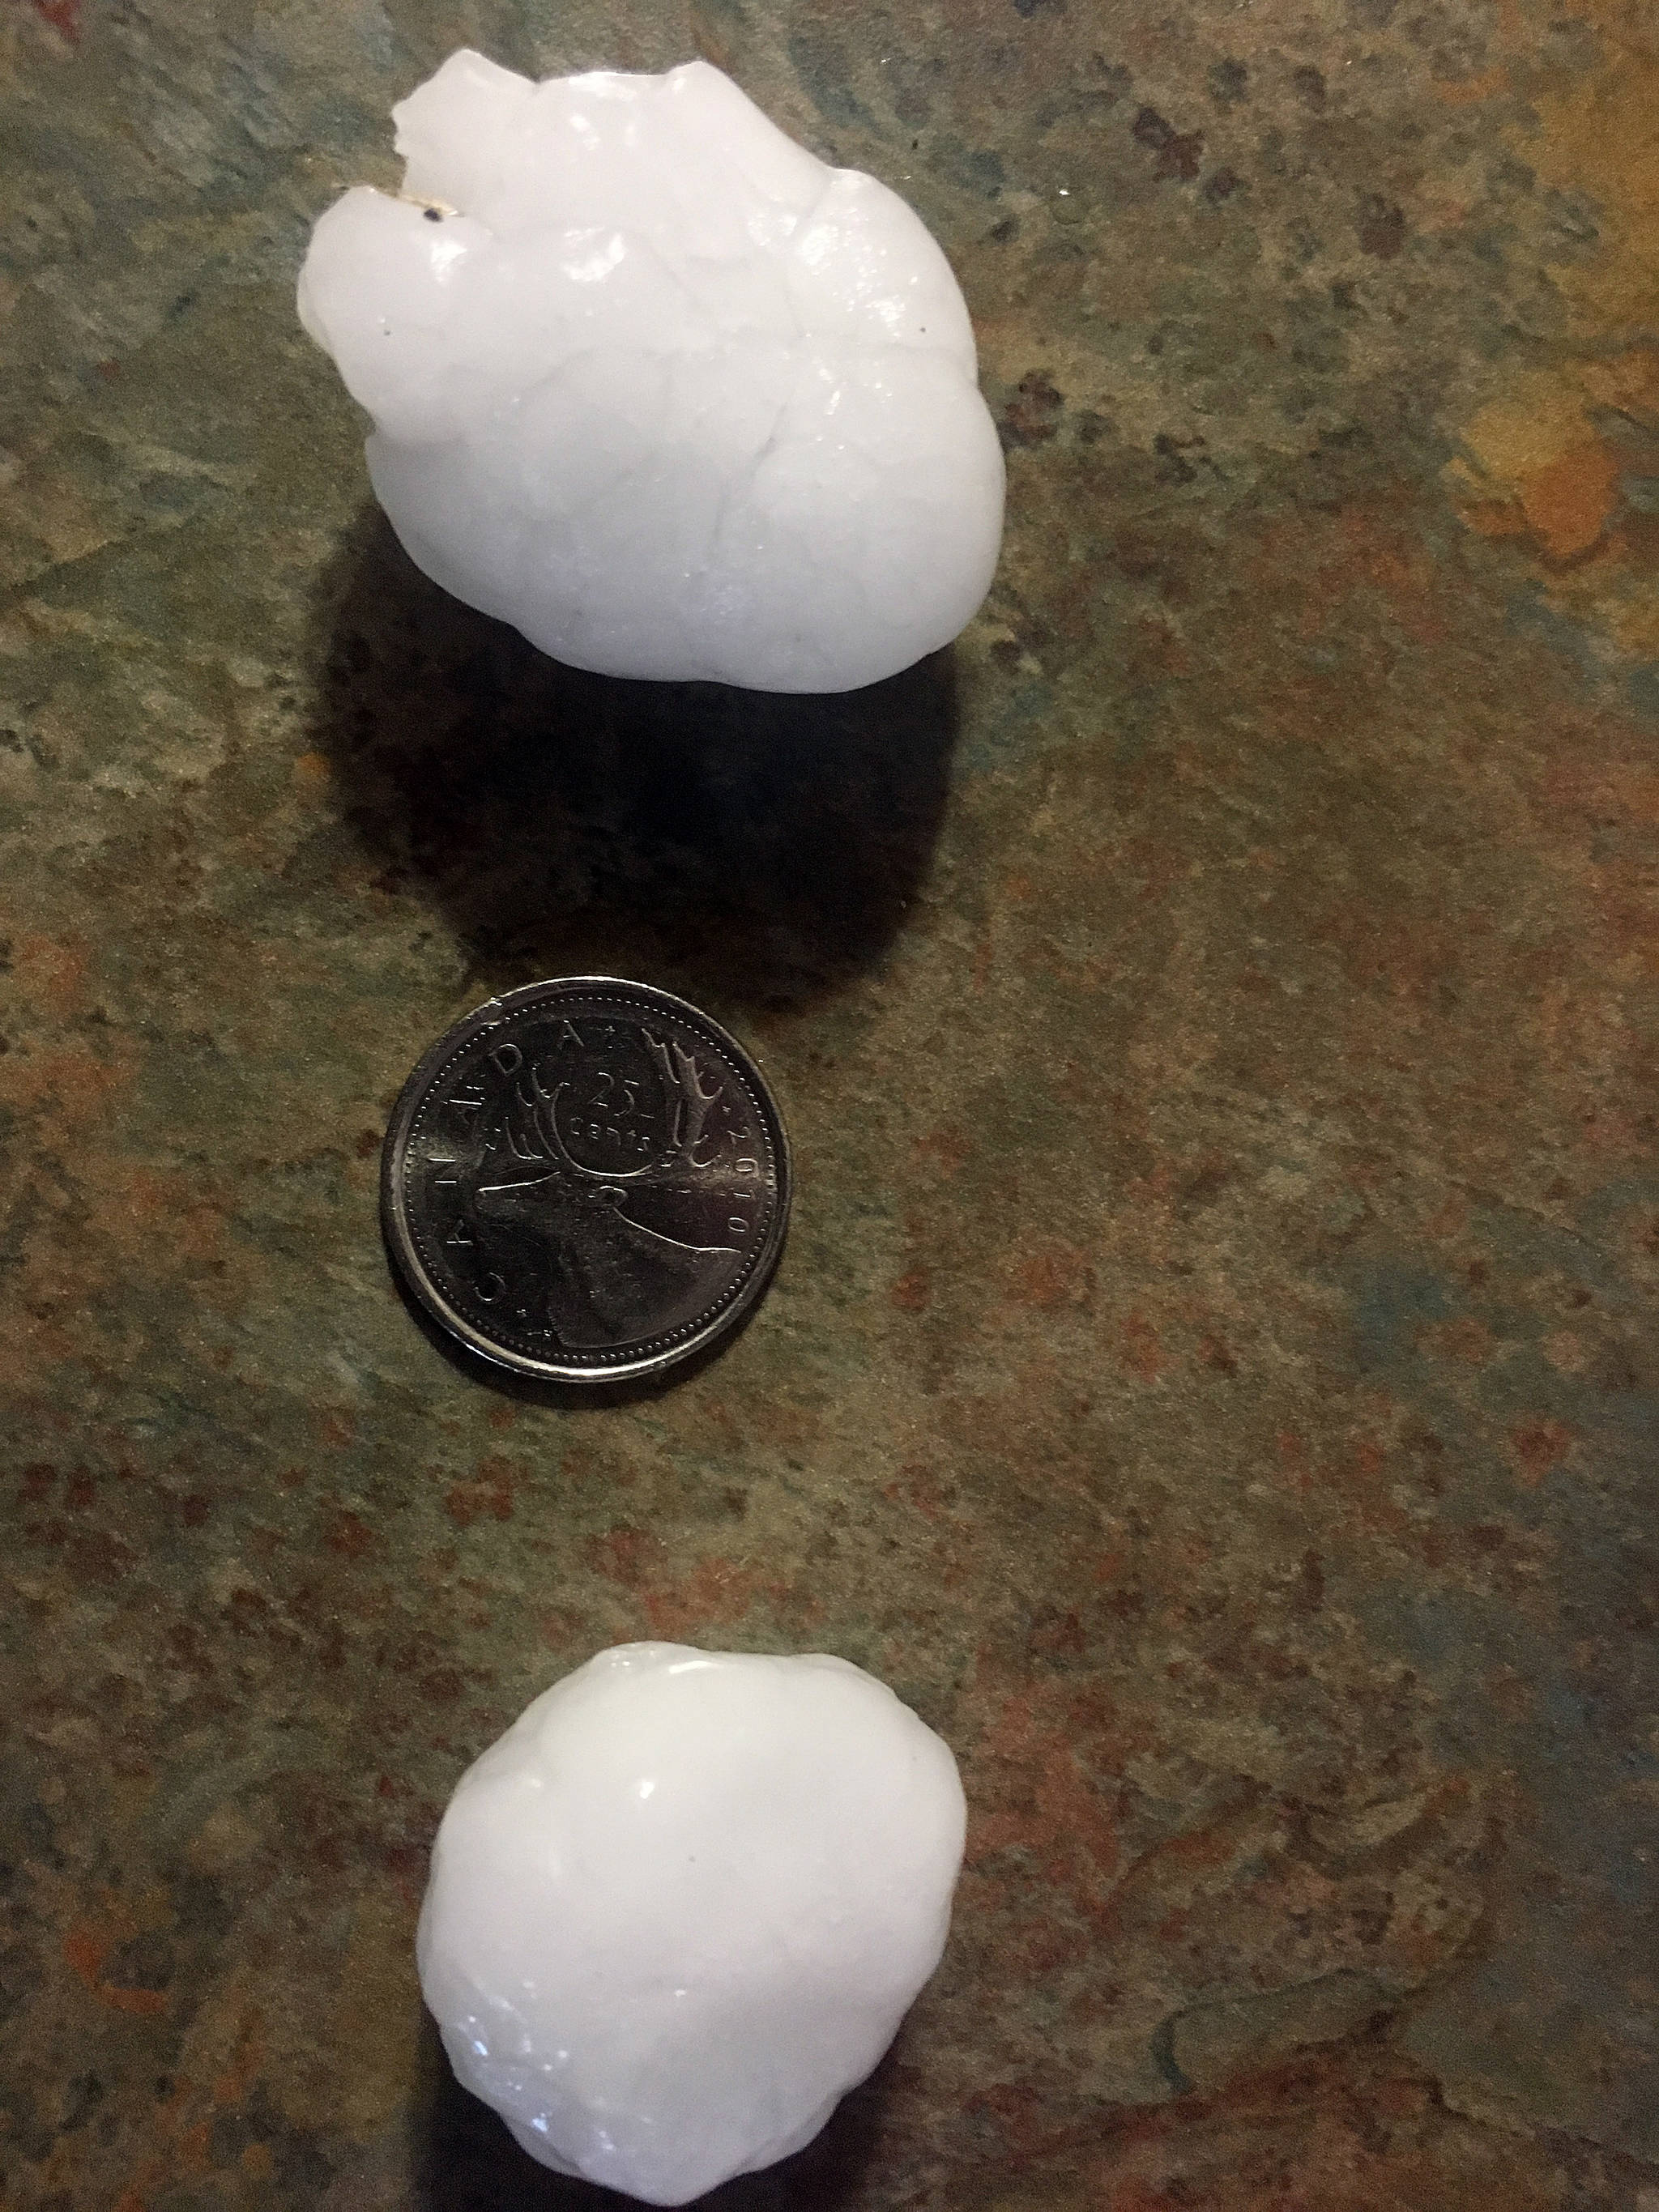 Hail pelted the Stettler area shortly after 7 p.m. July 13. (Lisa Joy/Black Press News Services)